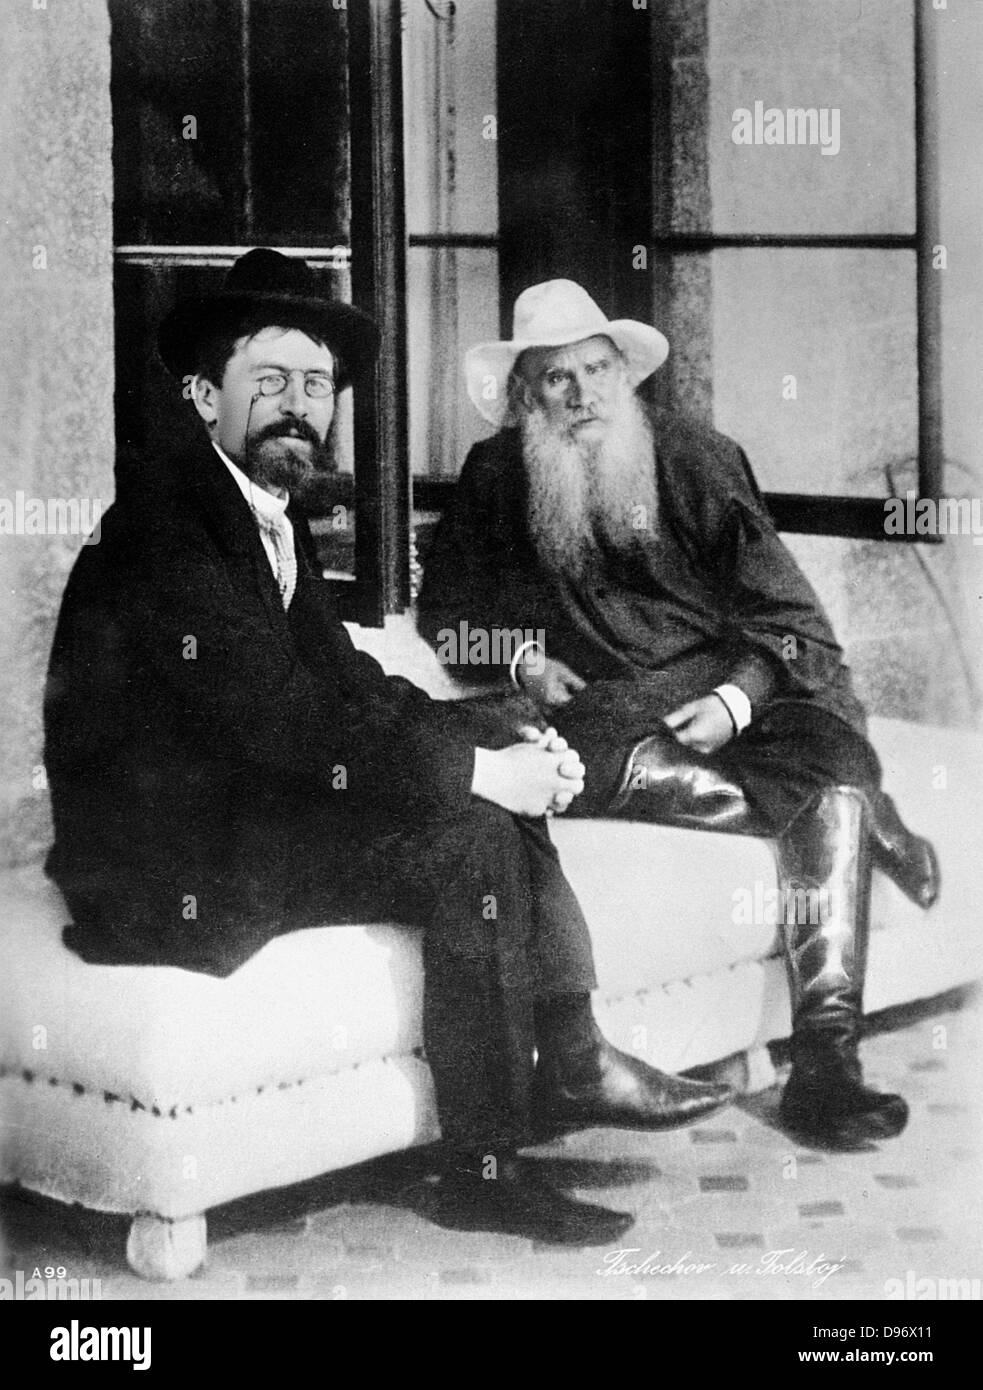 Anton Chewkhov (1860-1904) Russian writer, left, with Leo Tolstoy (1828-1910) Russian writer, philosopher and mystic. Photograph. Stock Photo